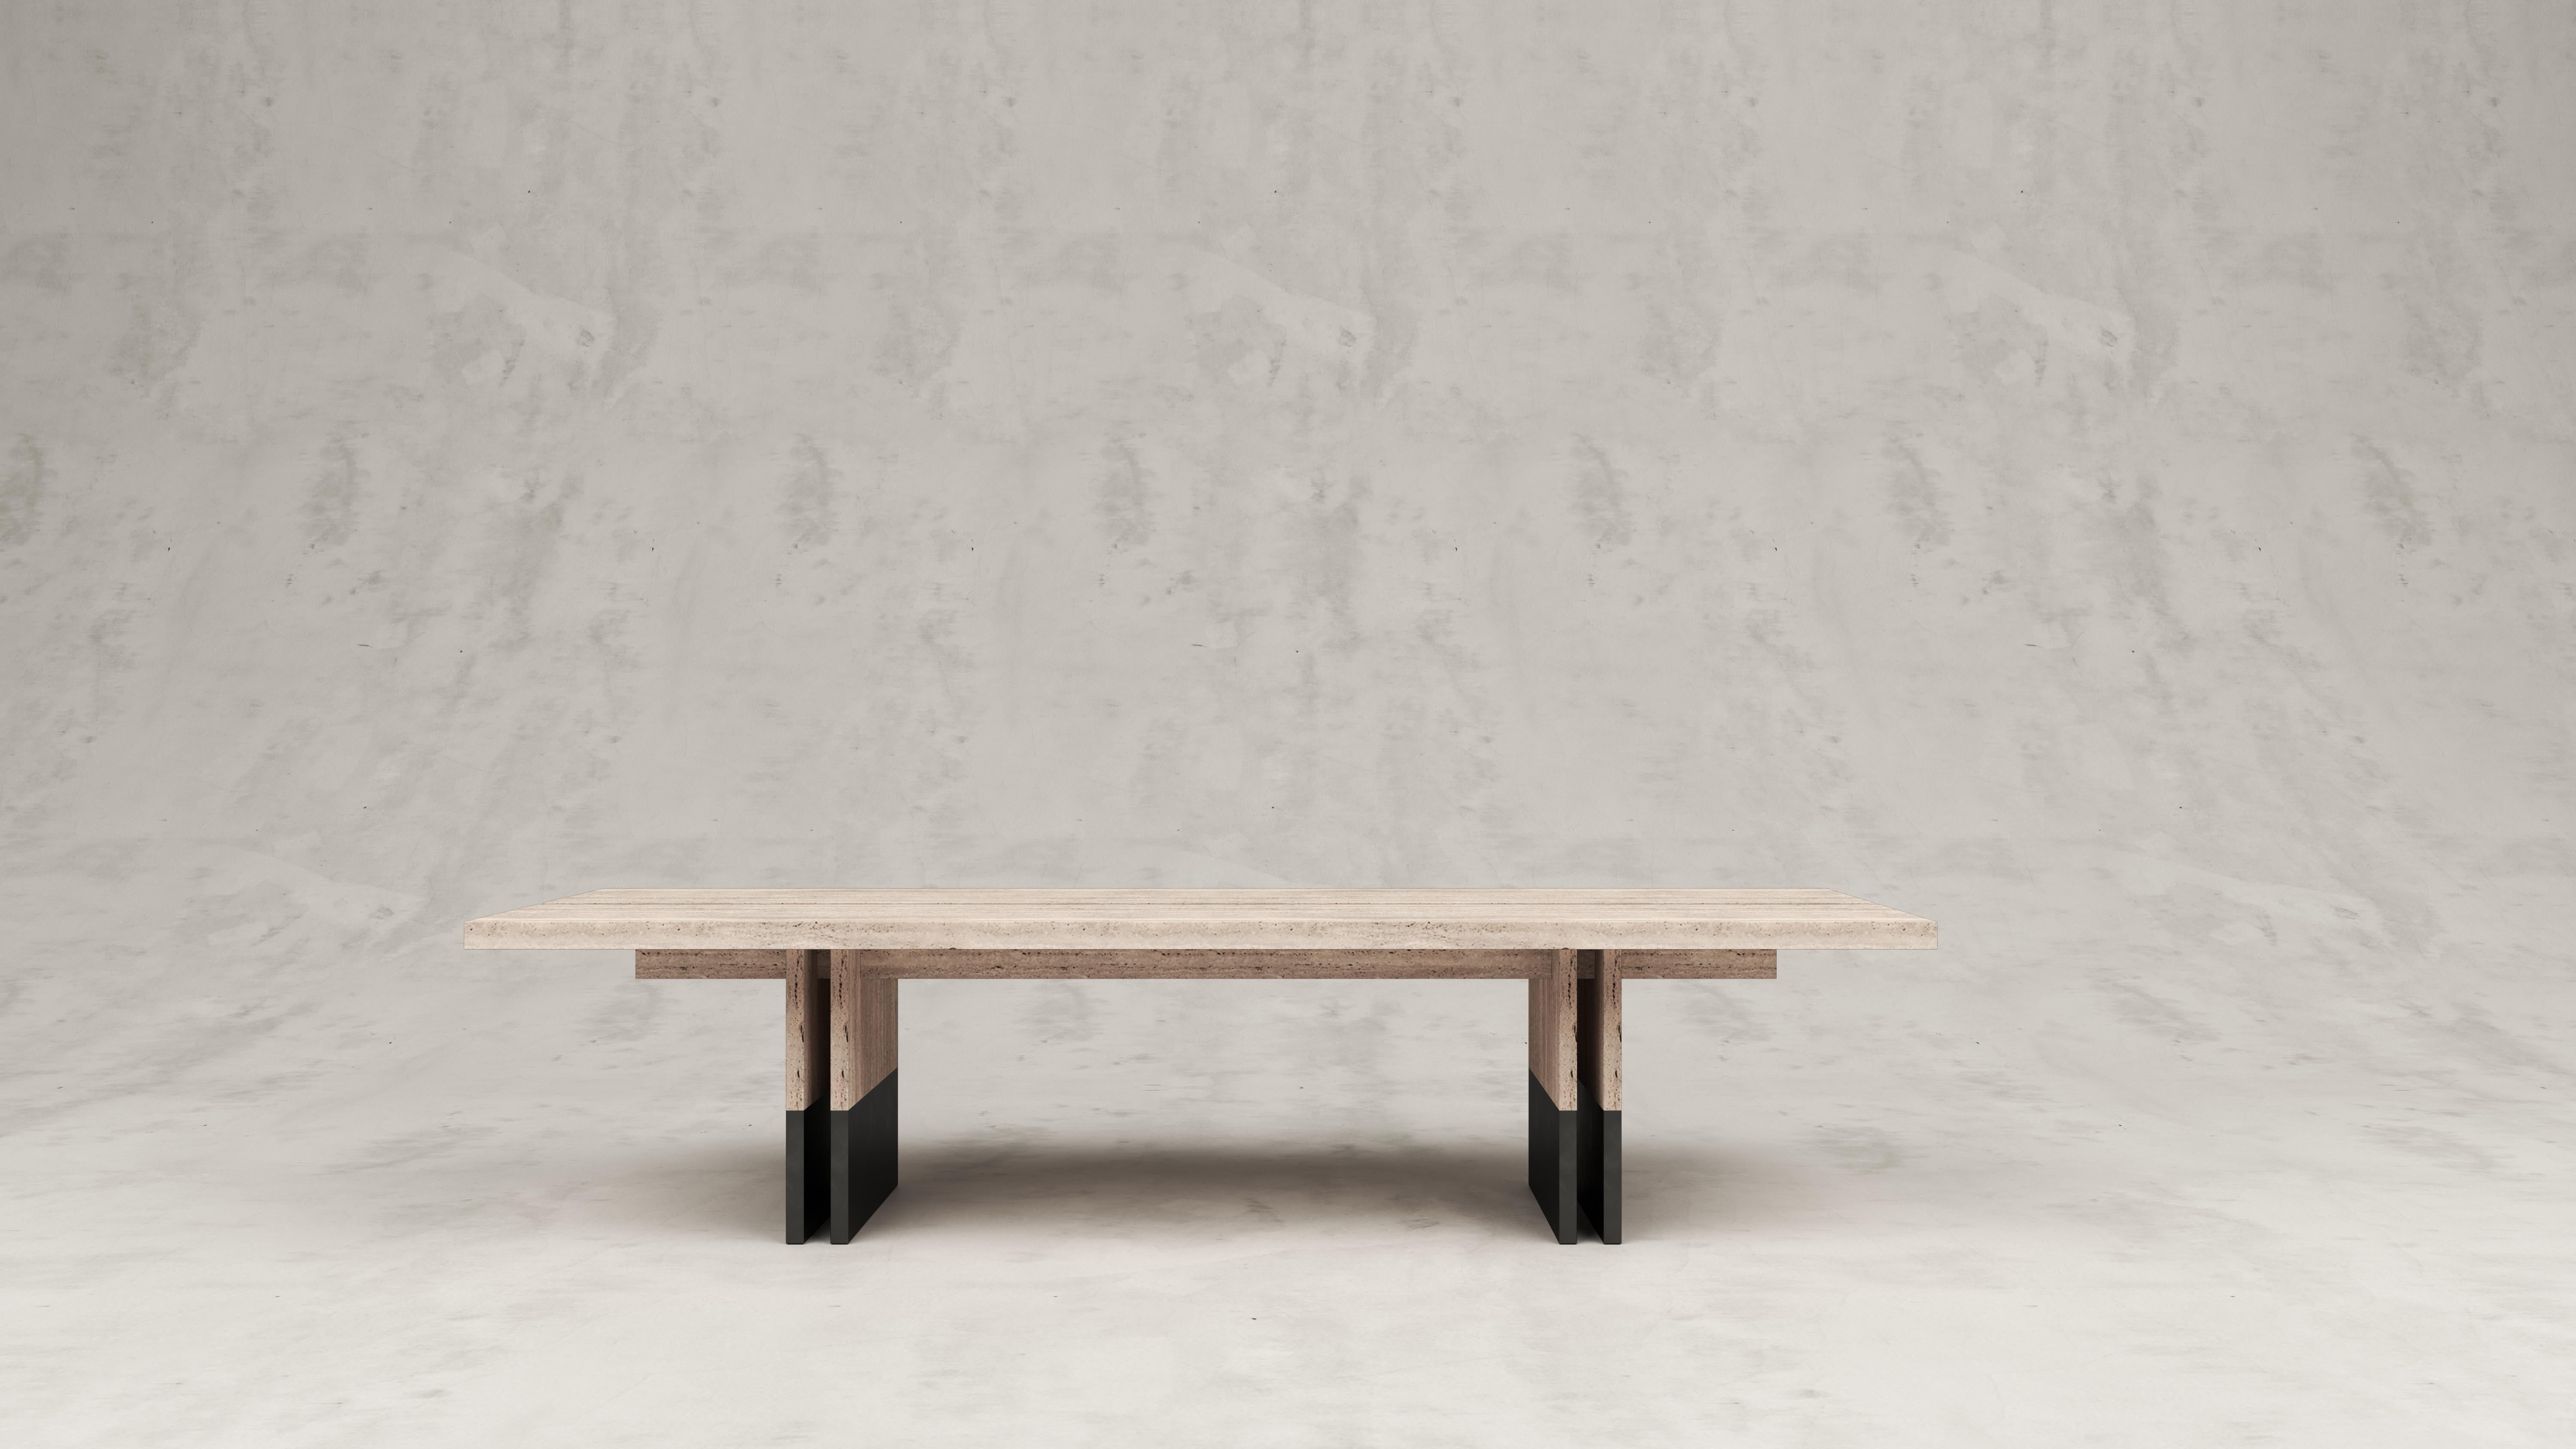 Rift travertino Gririo dining table without little feet by Andy Kerstens
Dimensions: W 240 x D 98 x H 74 cm
Materials: Travertino Gririo, Metal 
Optional little feet at table legs.
Handmade in Belgium.

Available in Solid Larch, Oak and Walnut